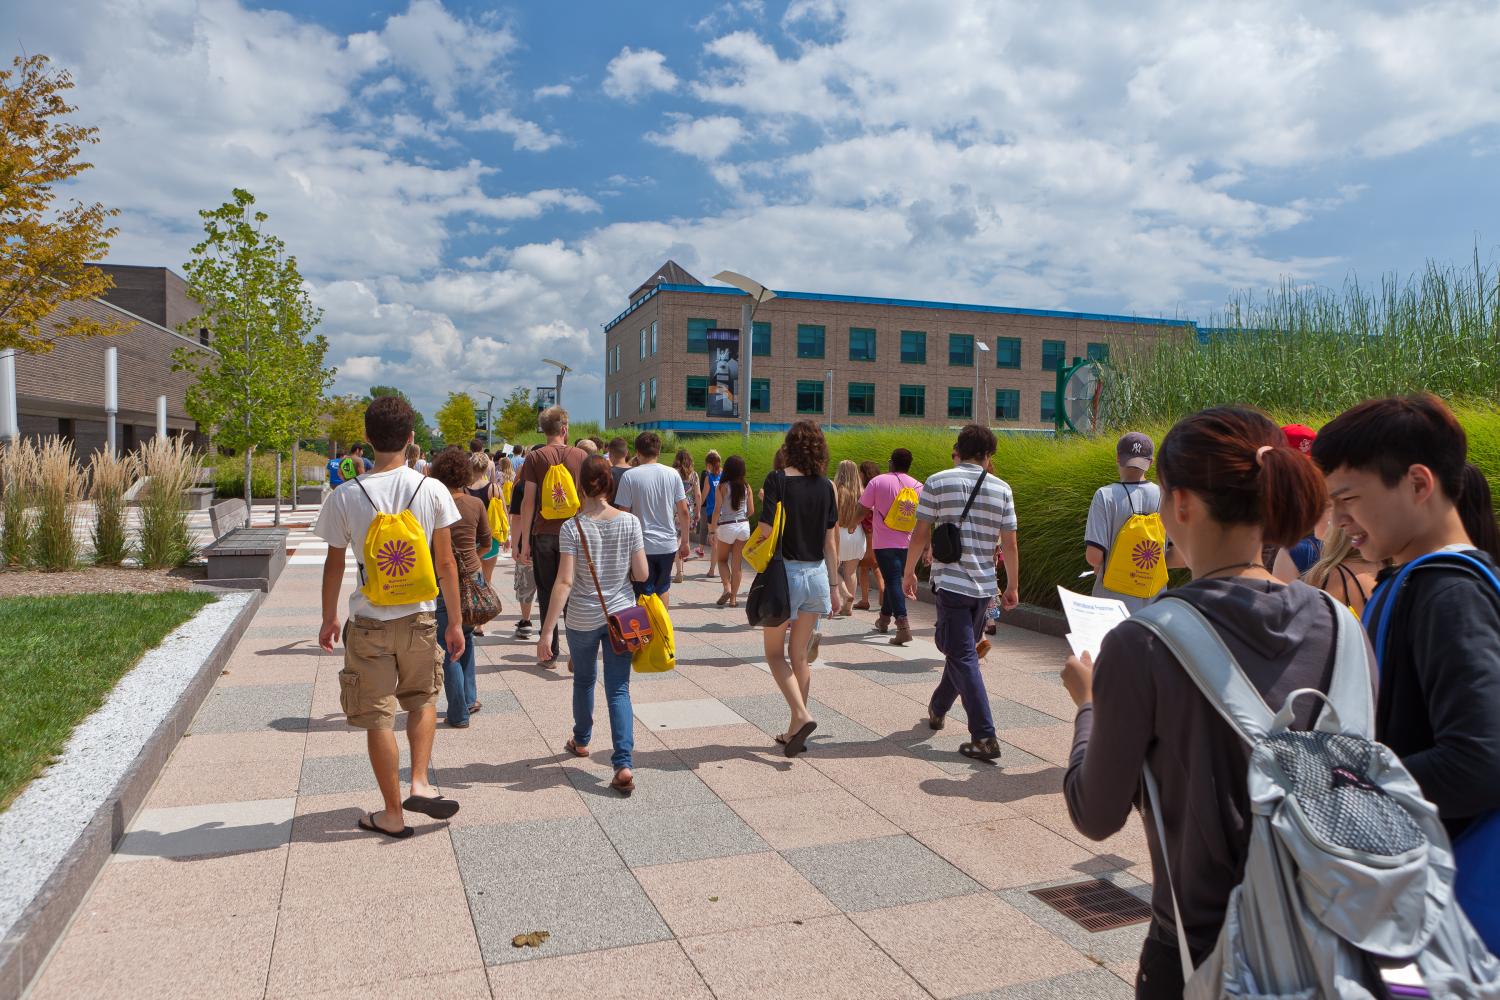 Walking+around+together%2C+new+college+students+take+a+tour+of+their+schools+campus.+Tours+and+orientations+help+students+get+ready+for+their+college+experience.